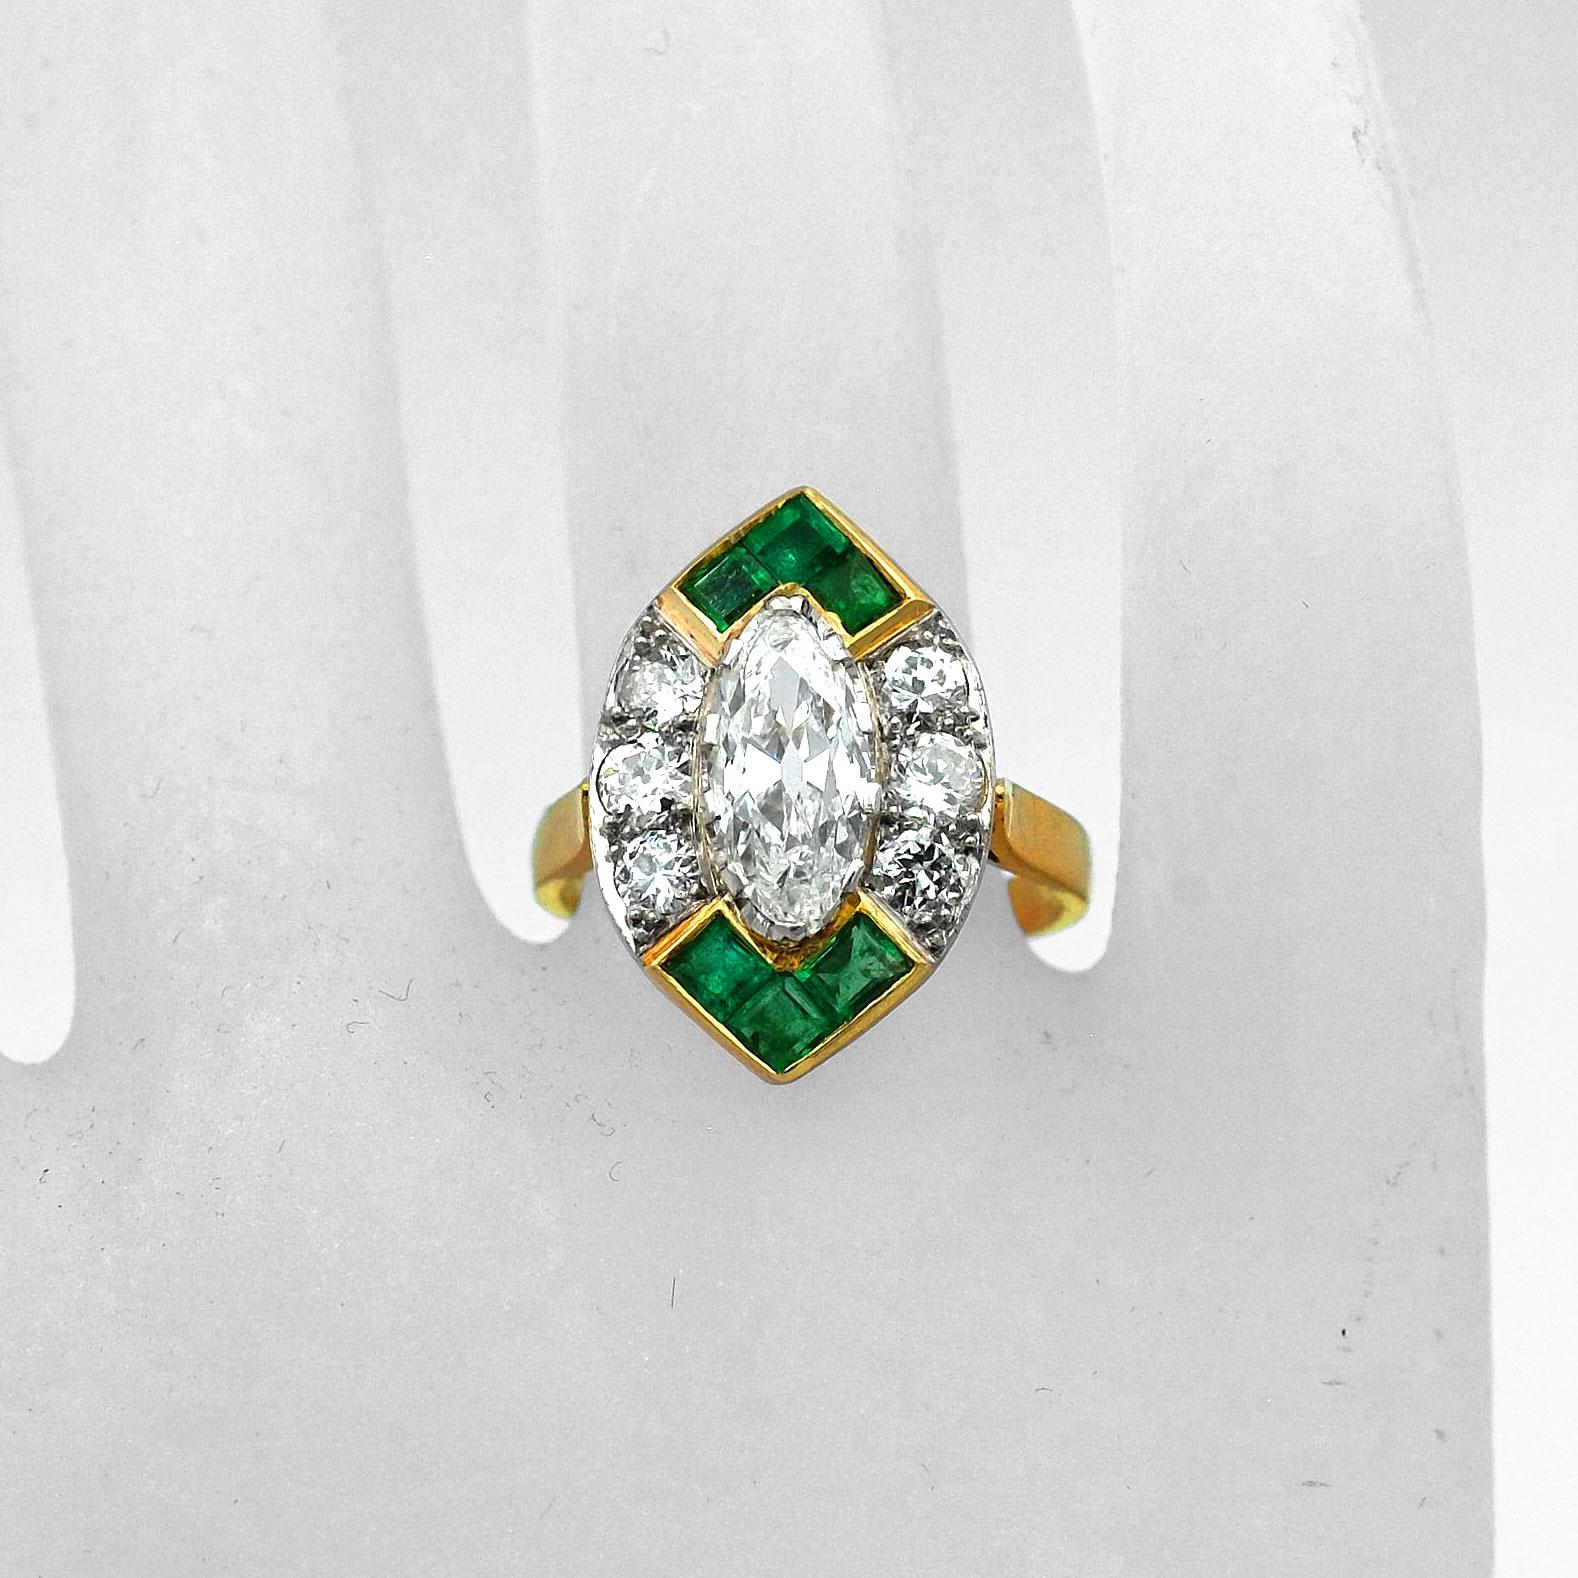 Art Deco 1.4 Carat Marquise Cut Diamond and Emerald 18K Gold Ring, circa 1930

Decorative diamond ring with a boat-shaped ring head, set with a radiant old-cut marquise diamond of 1.40 ct in an entourage of square cut emeralds  and 6 diamonds